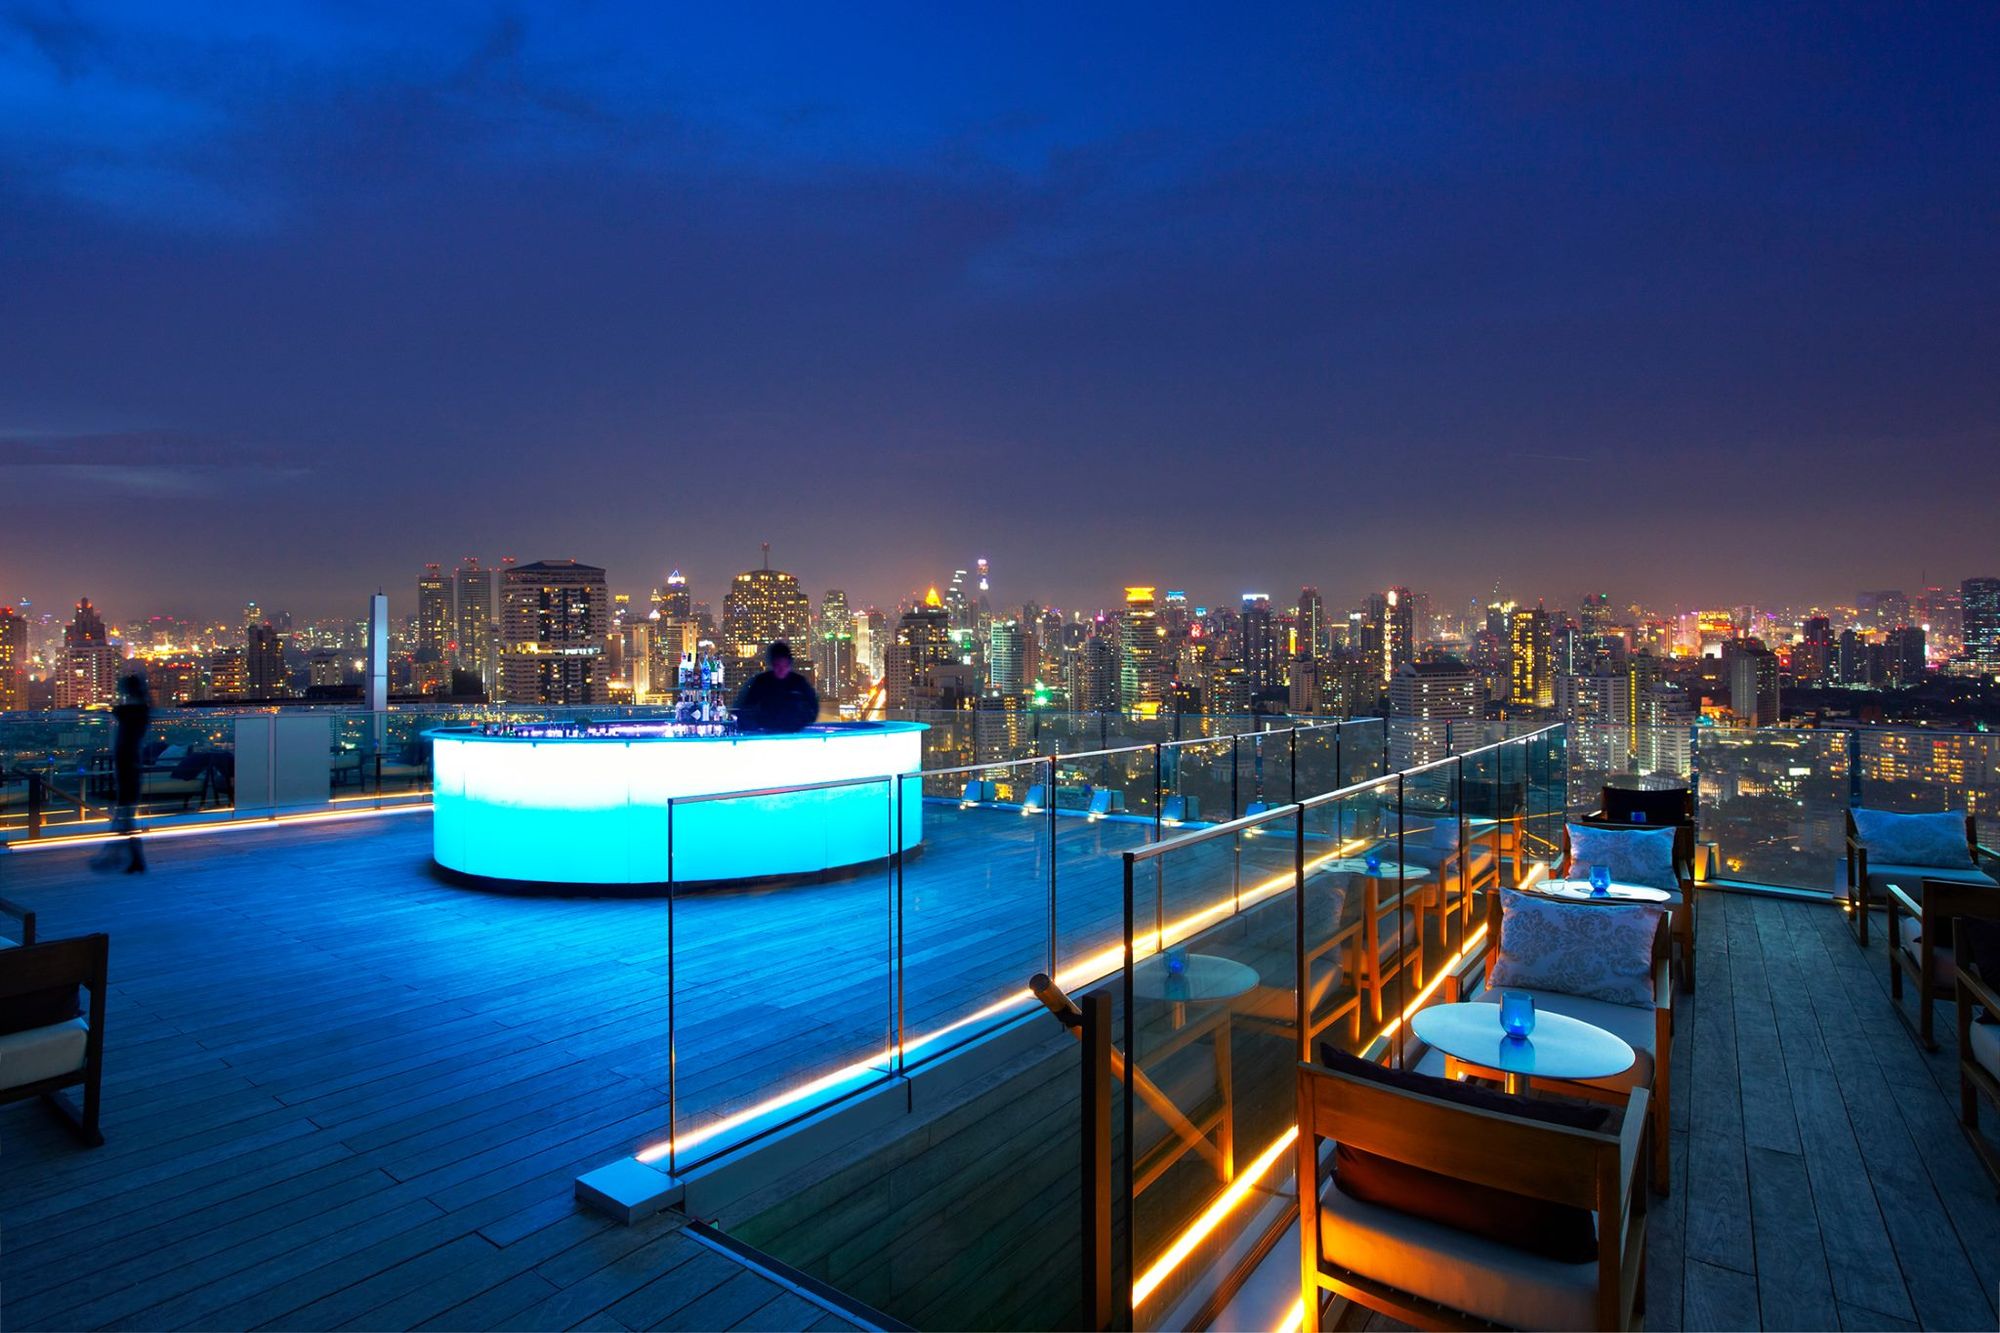 Octave Rooftop Lounge & Bar offers an enthralling nightlife experience.